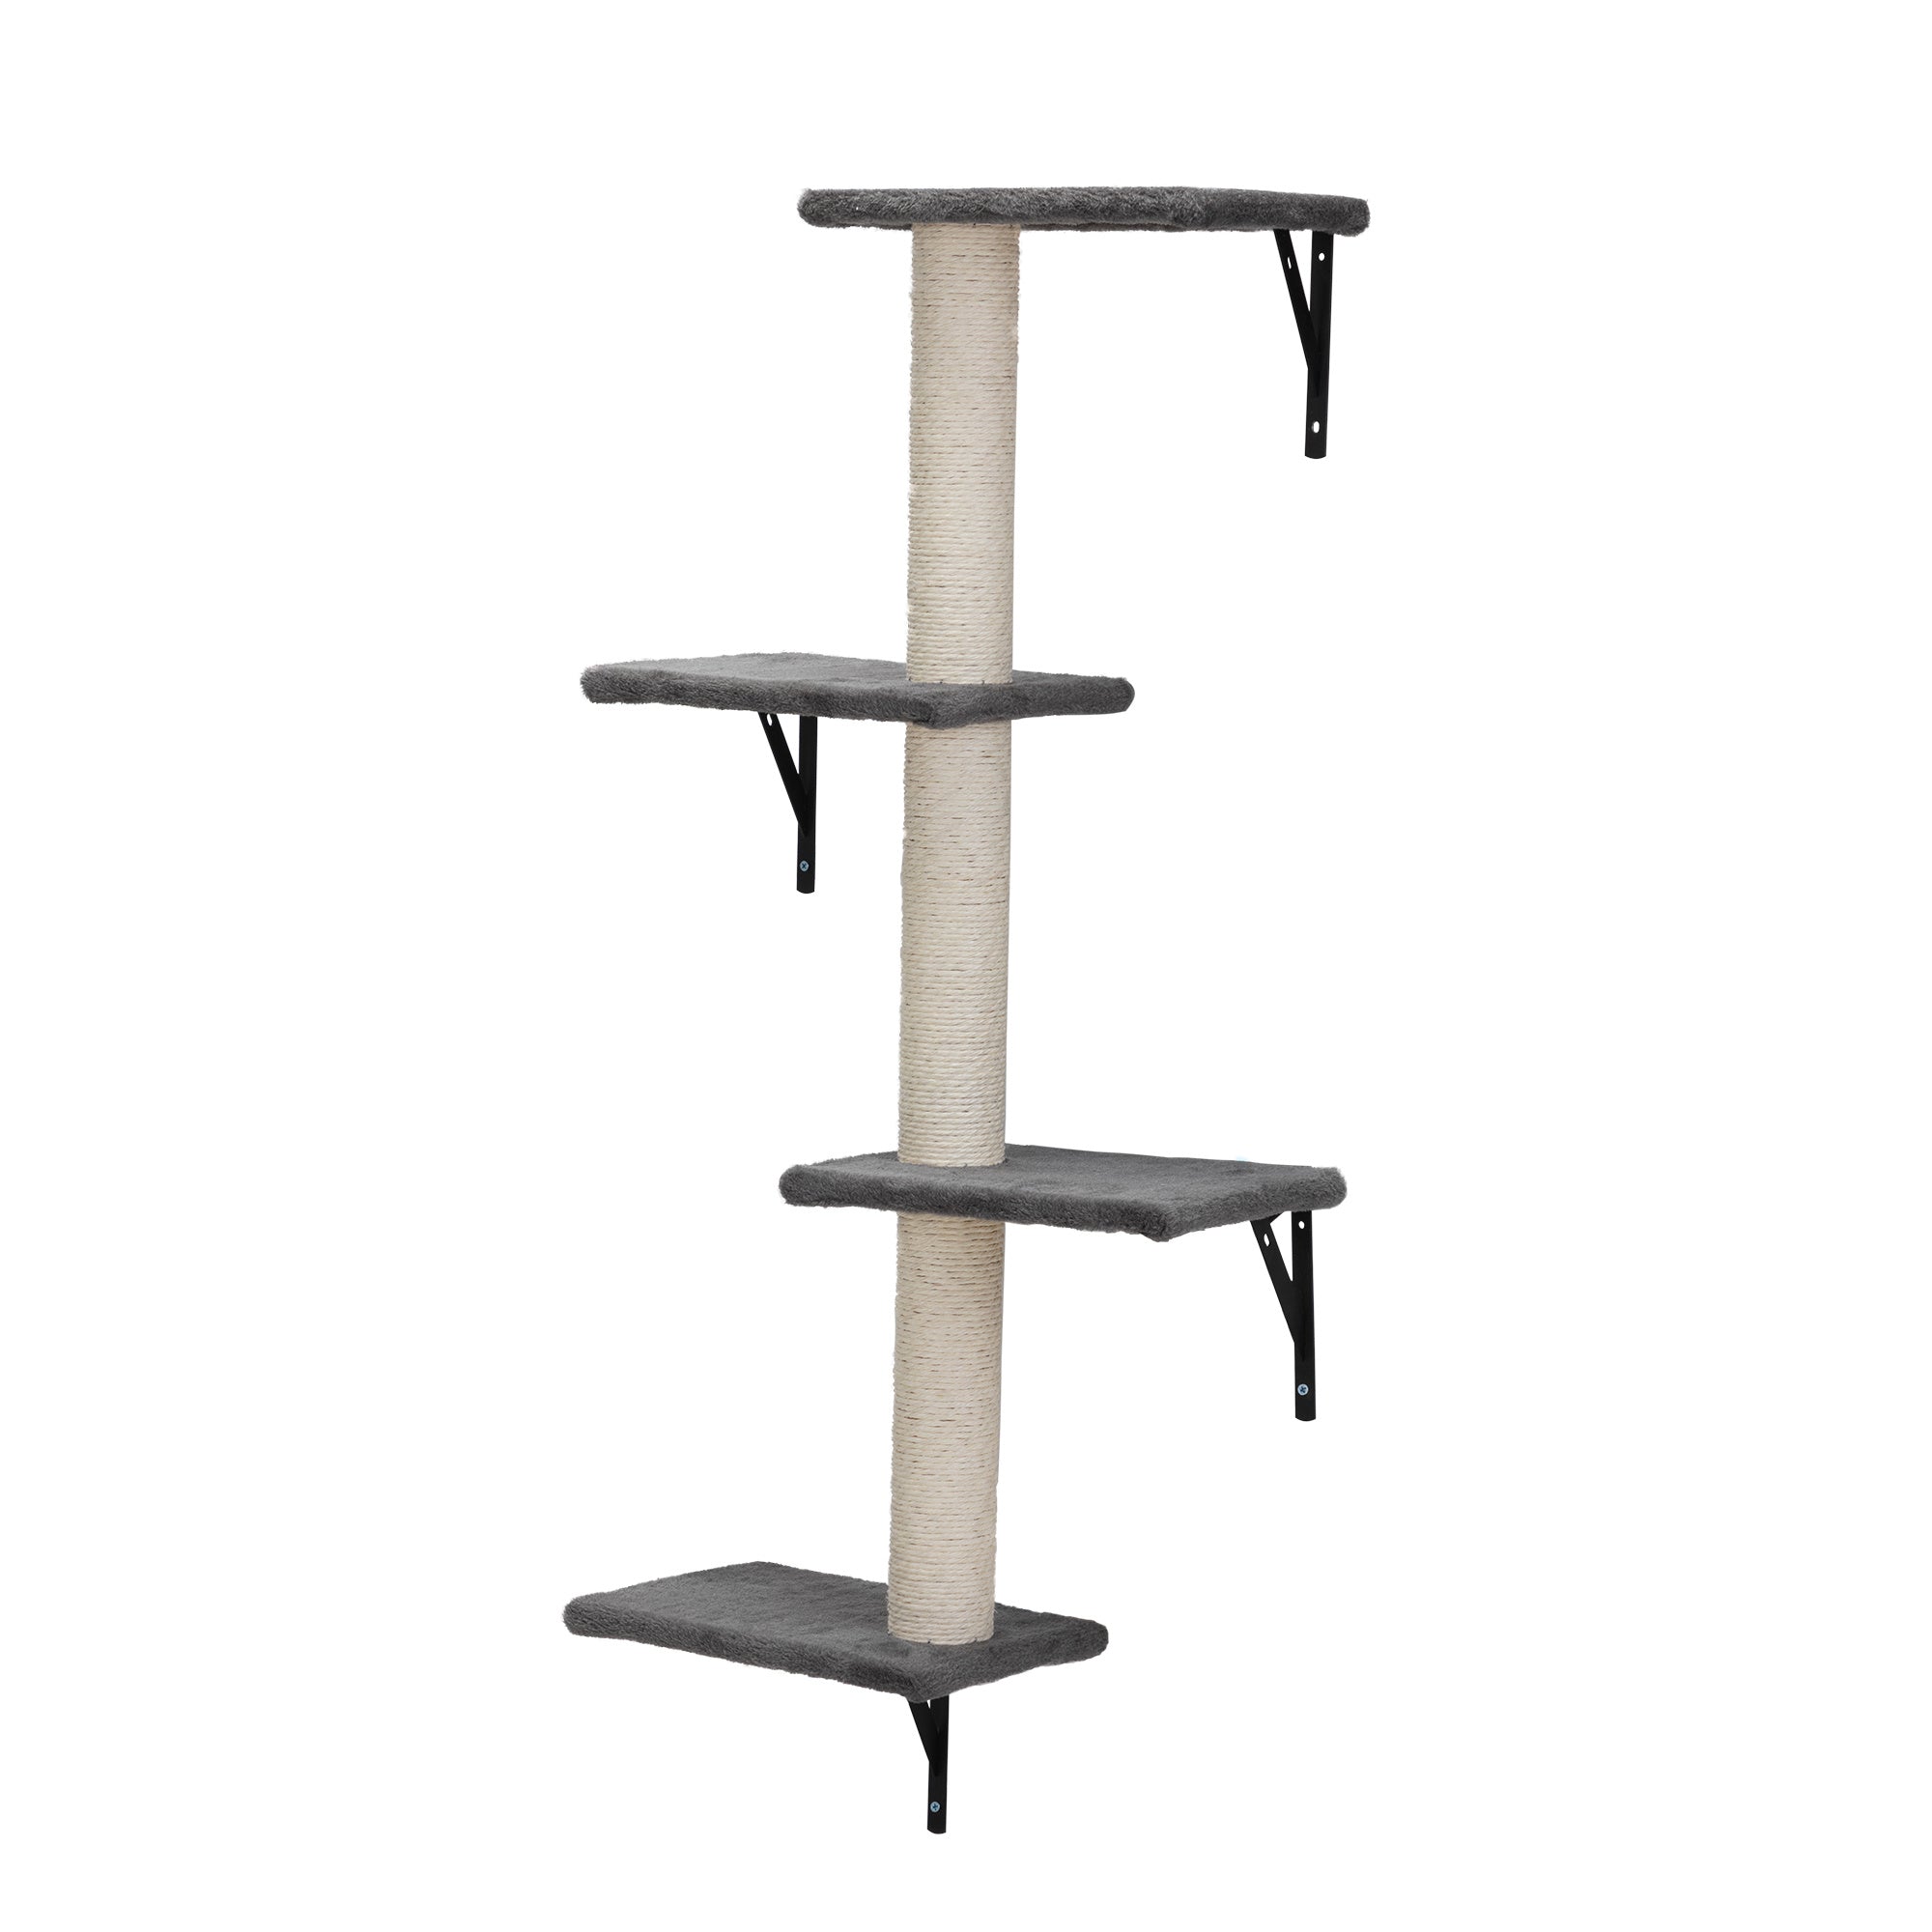 A cat is climbing up a 5 Pcs Wall Mounted Cat Climber Set, also known as floating cat shelves and perches, in a room.